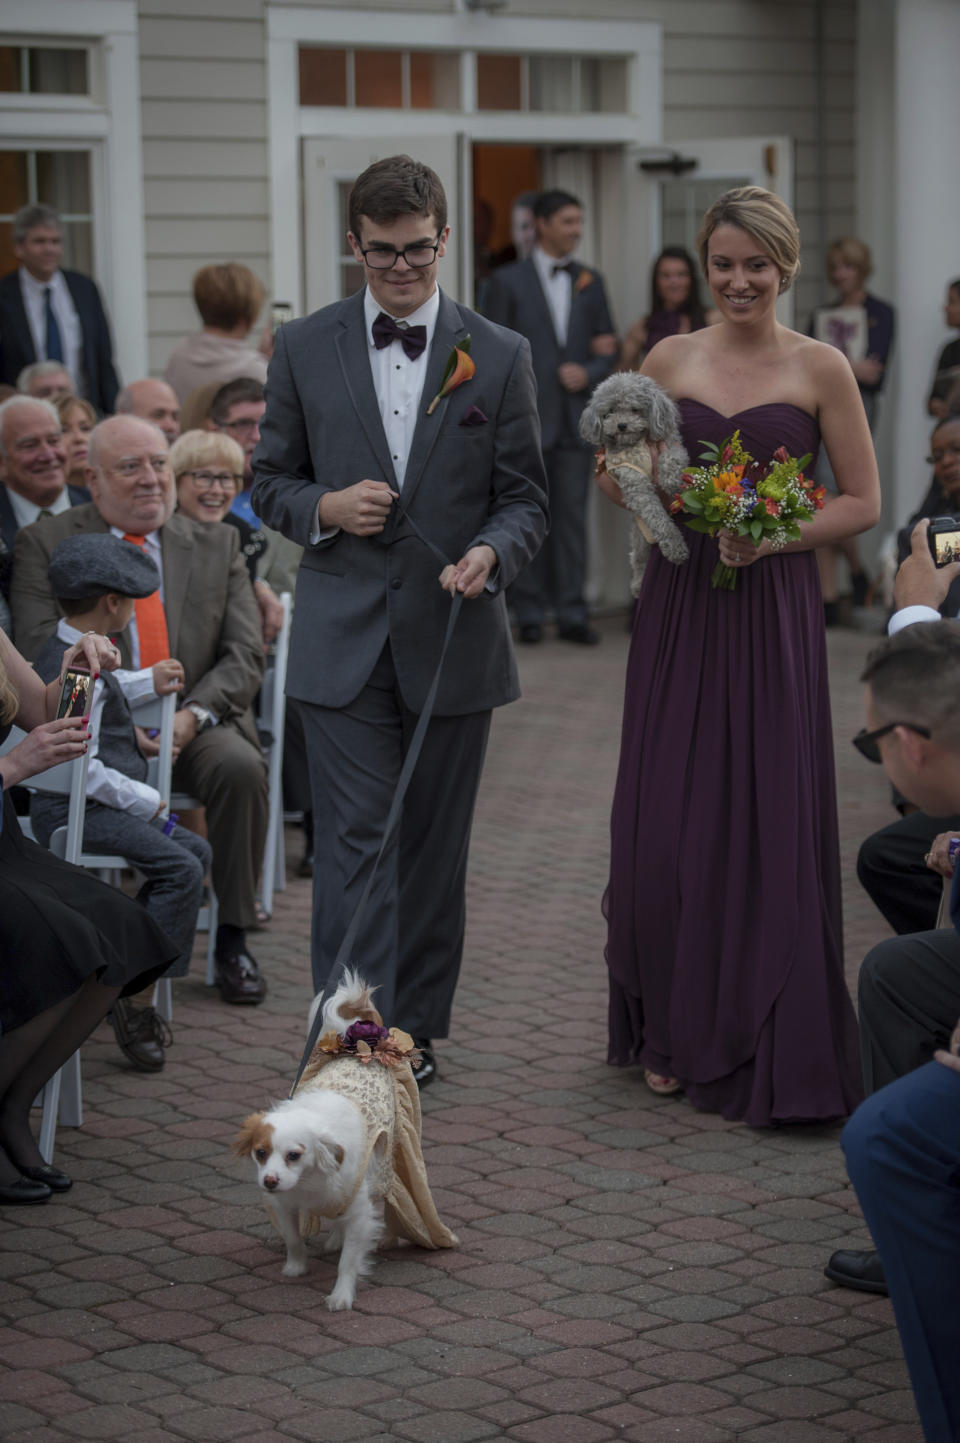 This Oct. 27, 2017 photo shows Ryan Curry and Laura Moylan walking Izzy, right, and Zoey down the aisle during the wedding of Kelly Curry and Patrick St. Onge in Haddam, Conn. The bride and groom's dogs took part in the ceremony. It's no longer unusual for brides and grooms to include pets in their wedding photos or even in the ceremony. But it can be tough to manage that along with everything else. (Jeffrey Herget/Studio 393 via AP)